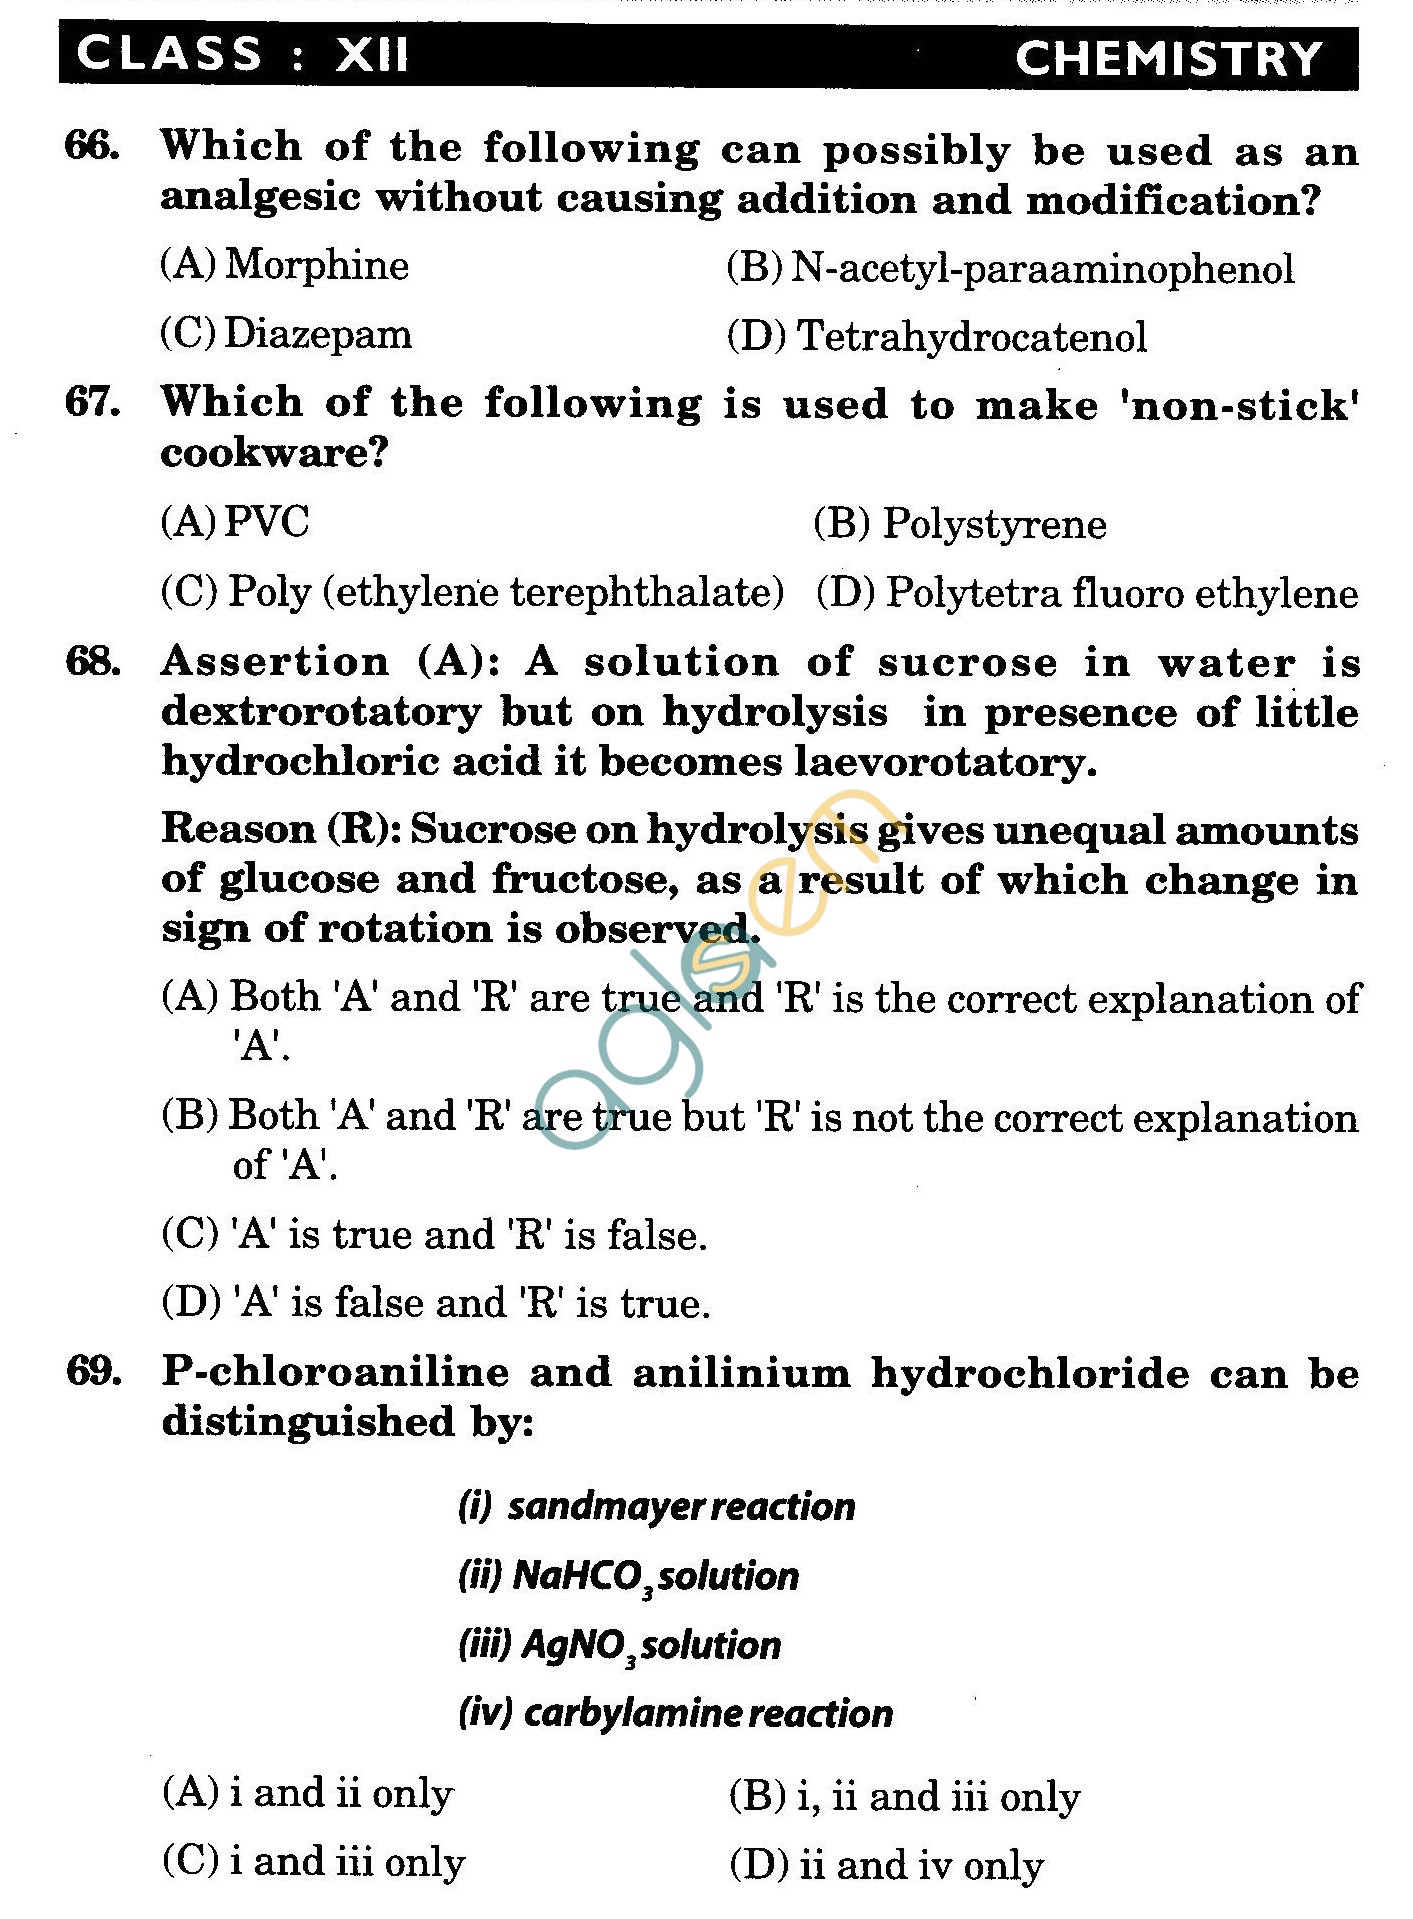 NSTSE 2009 Class XII PCB Question Paper with Answers - Chemistry